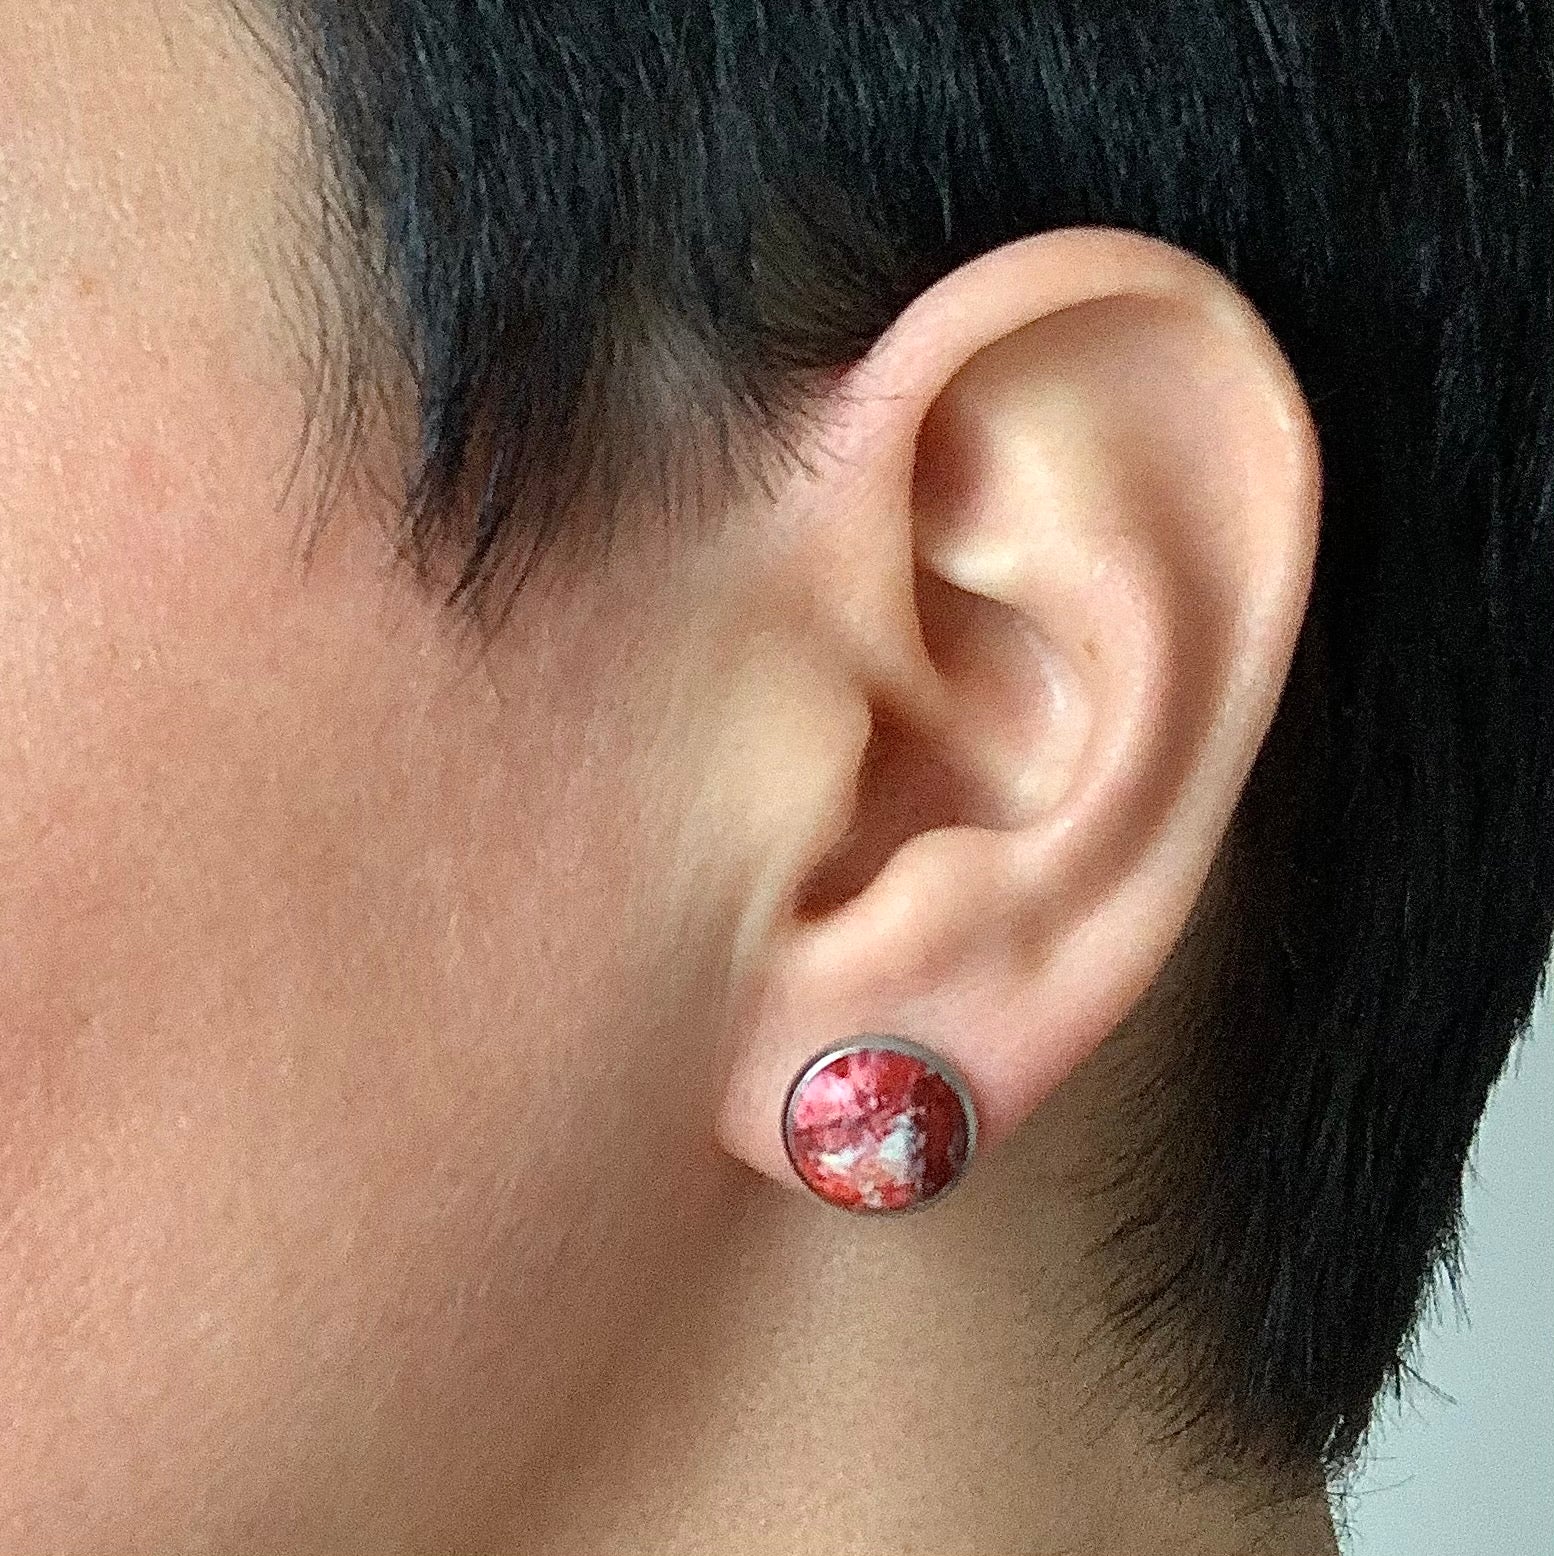 12mm Round red studs made from recycled plastic